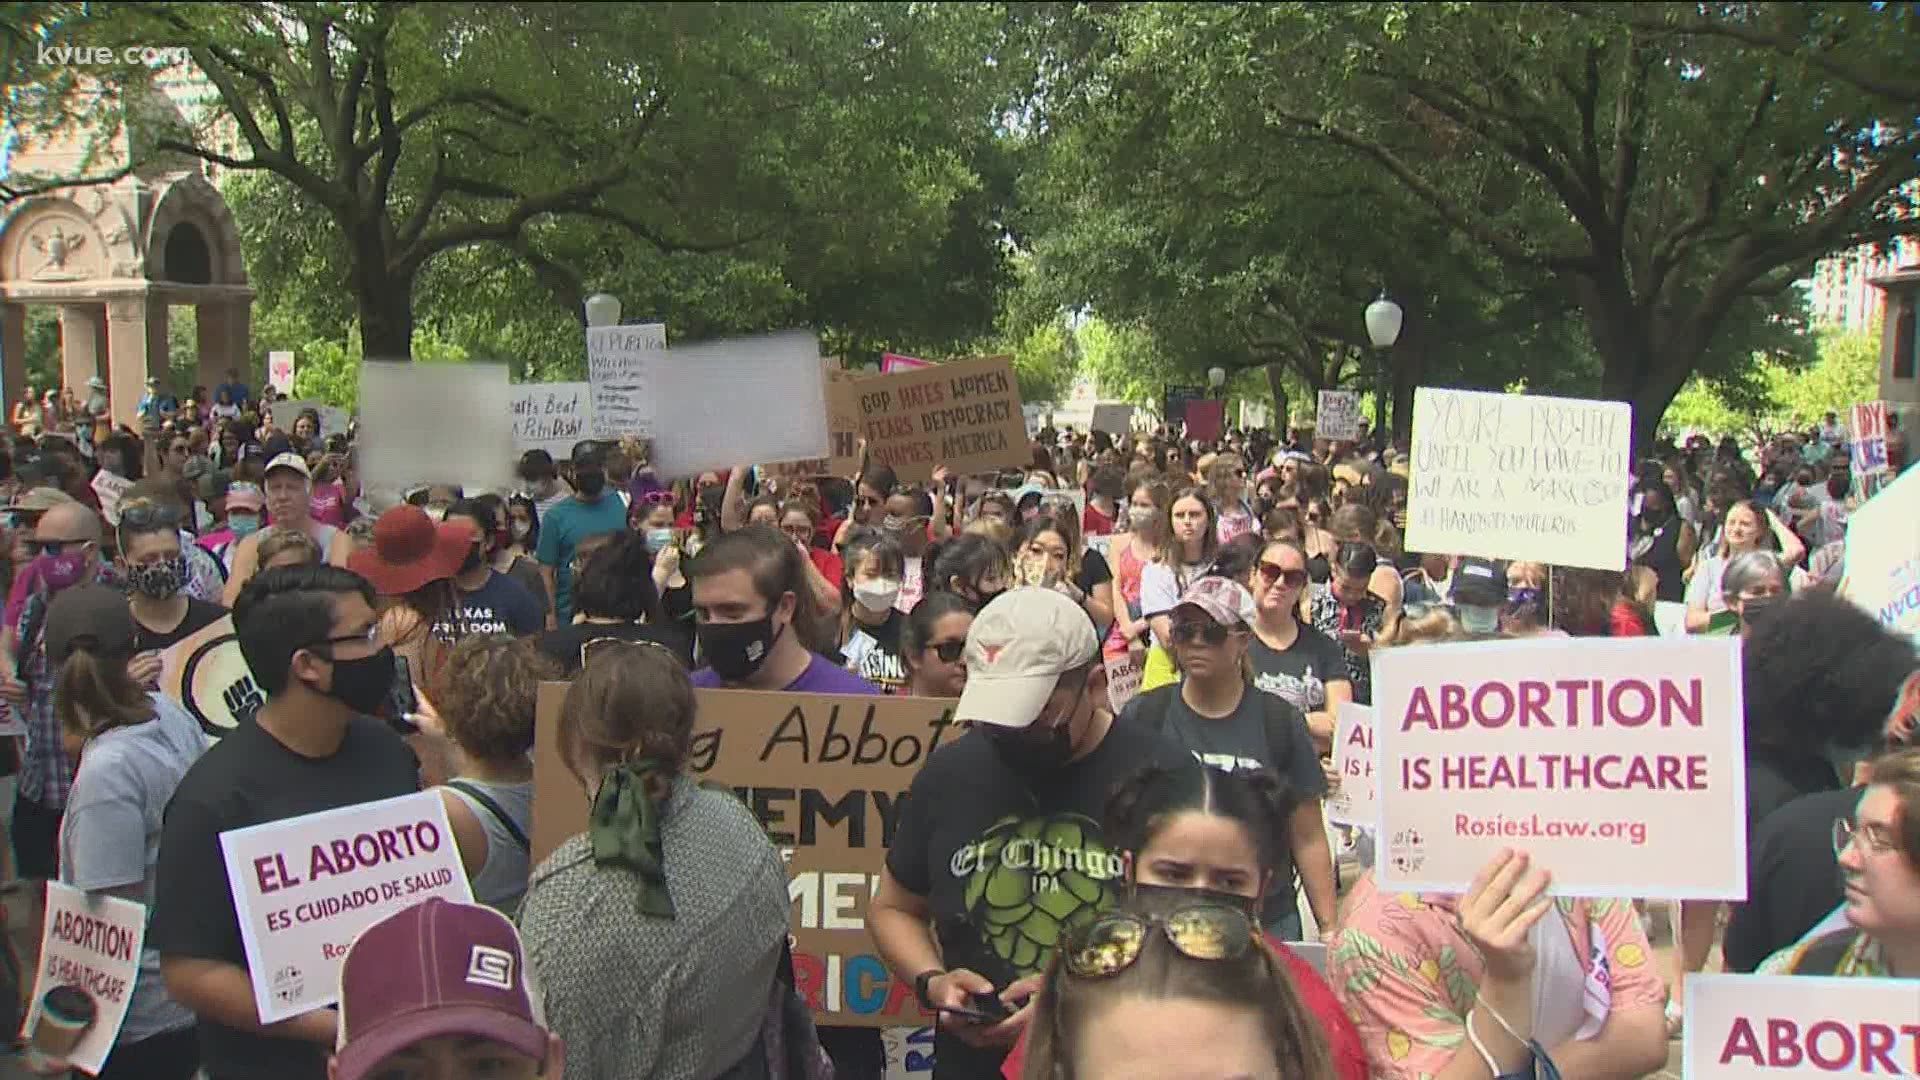 There was a rally against the Legislature's restrictive abortion bill at the Texas Capitol building on Saturday. That bill would ban abortion as early as six weeks.